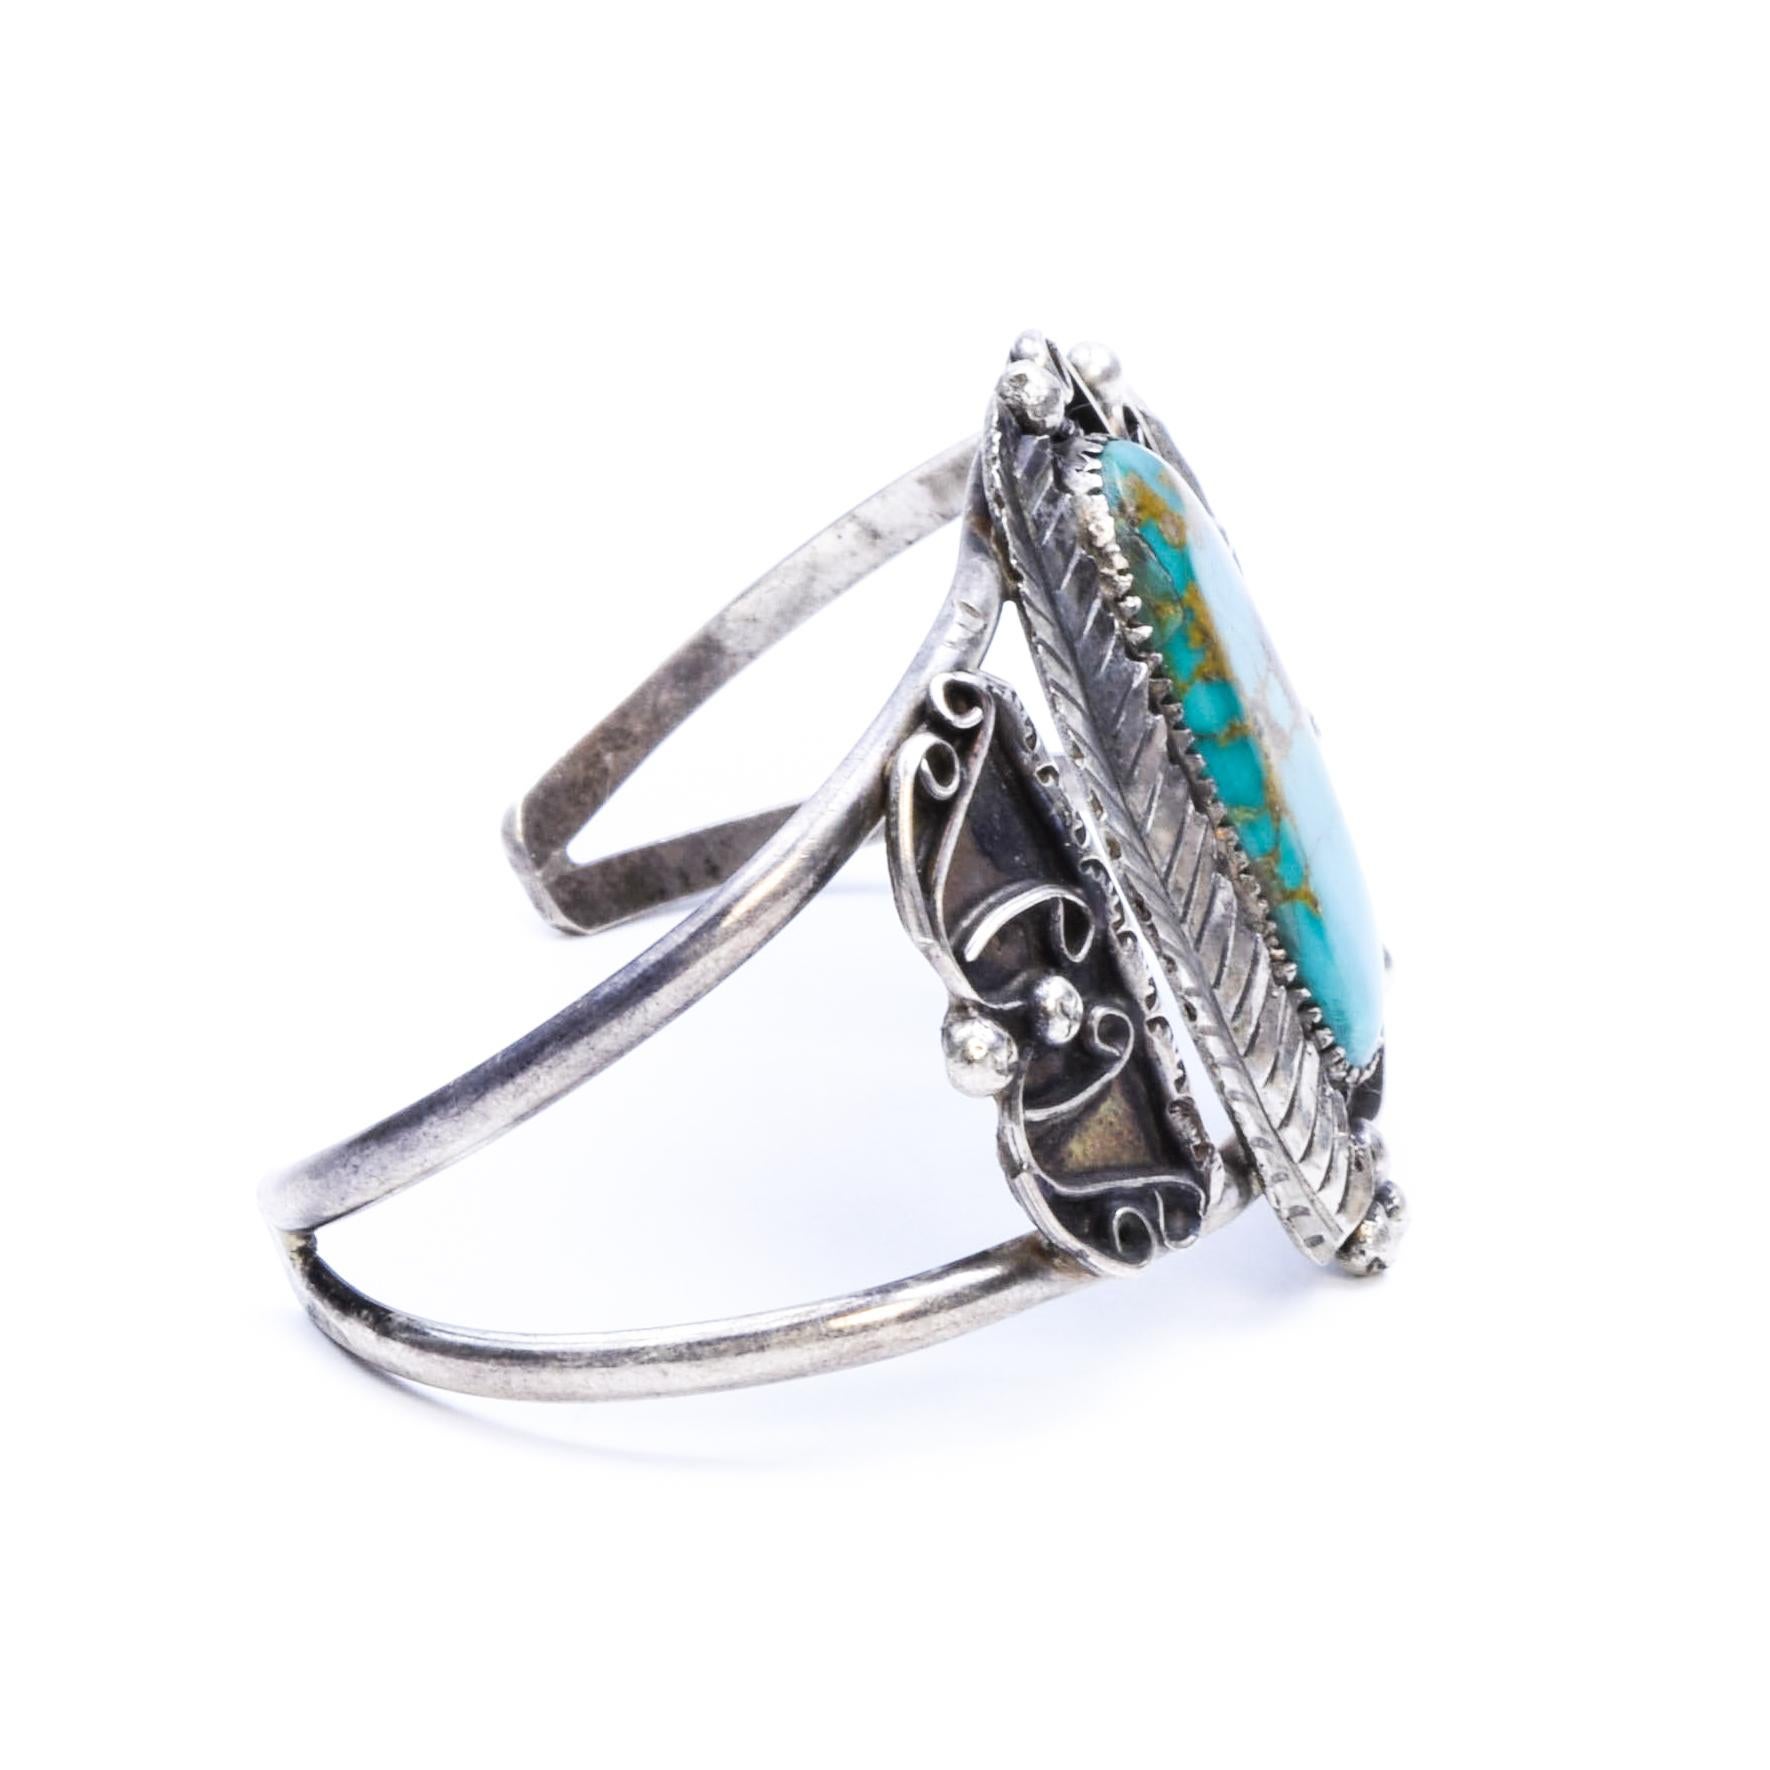 Navajo Cerrillos Turquoise and Sterling Bracelet In Good Condition For Sale In Coeur d Alene, ID